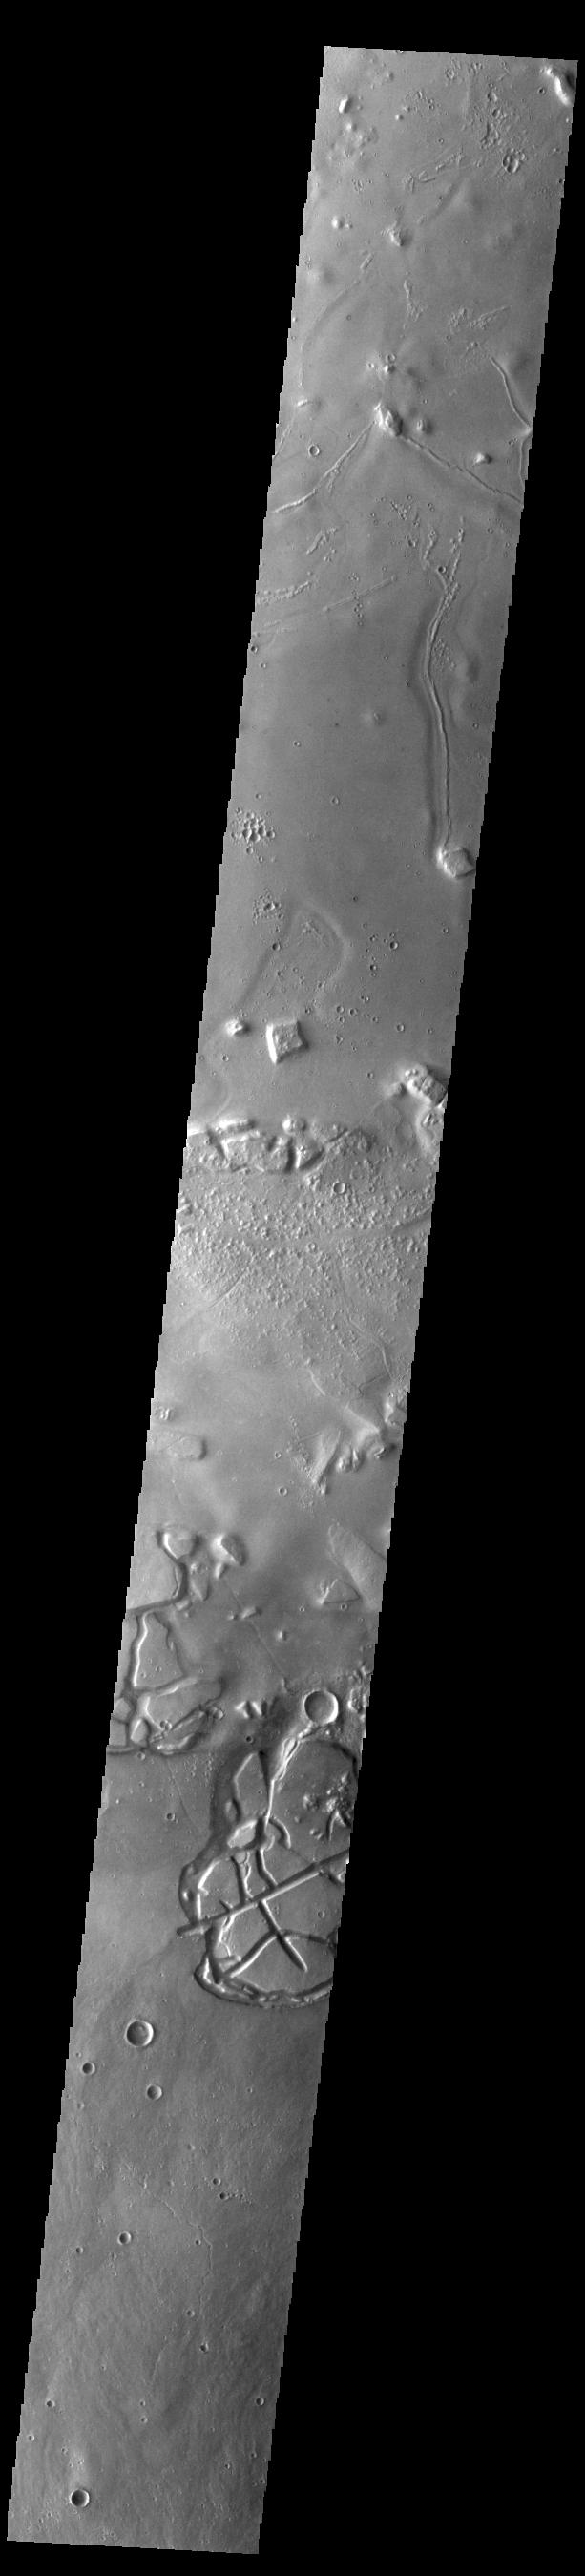 This image from NASAs Mars Odyssey shows Galaxias Chaos, located on the northern border of the Elyisum volcanic complex.